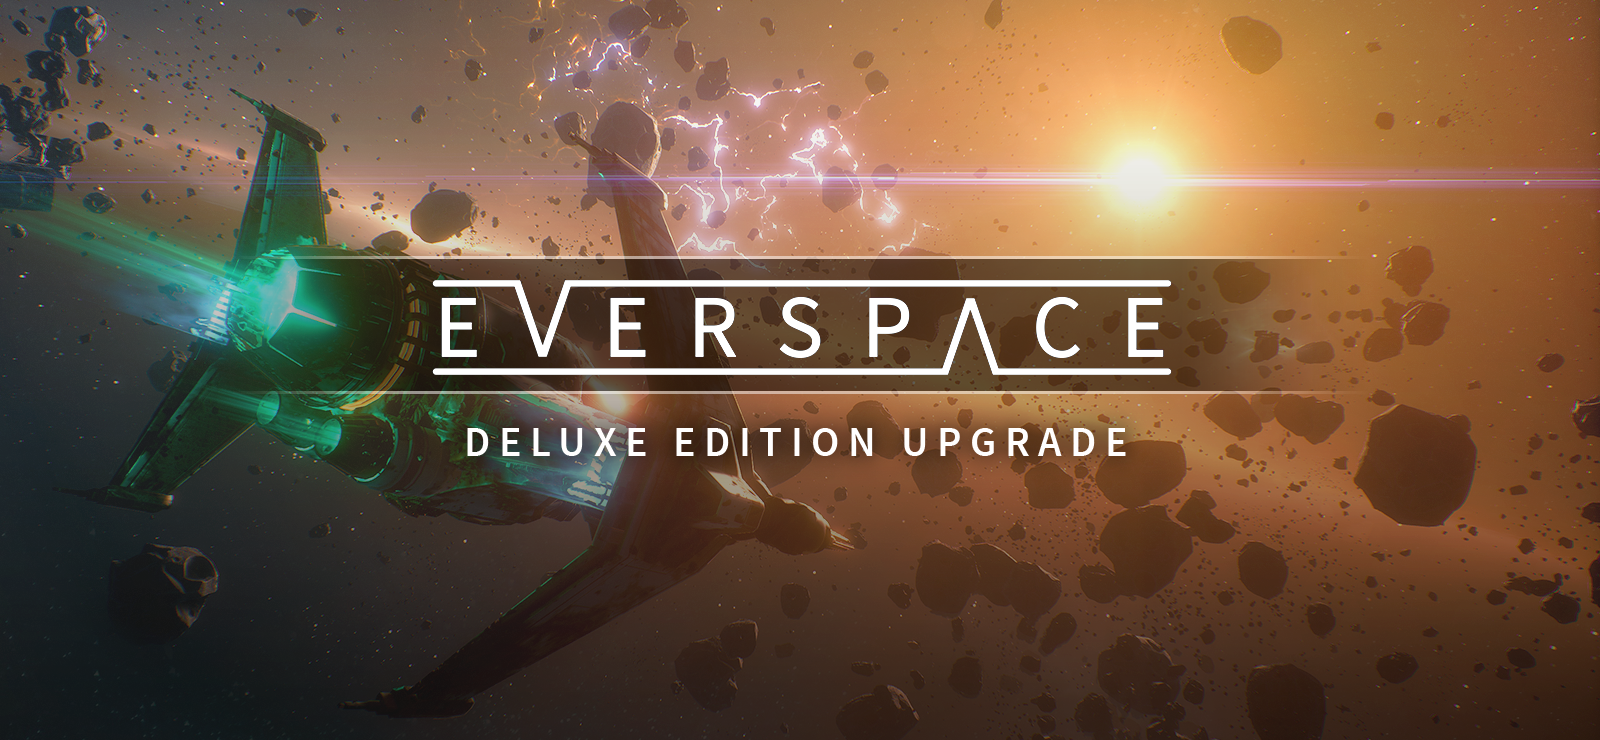 EVERSPACE™ Deluxe Edition Upgrade